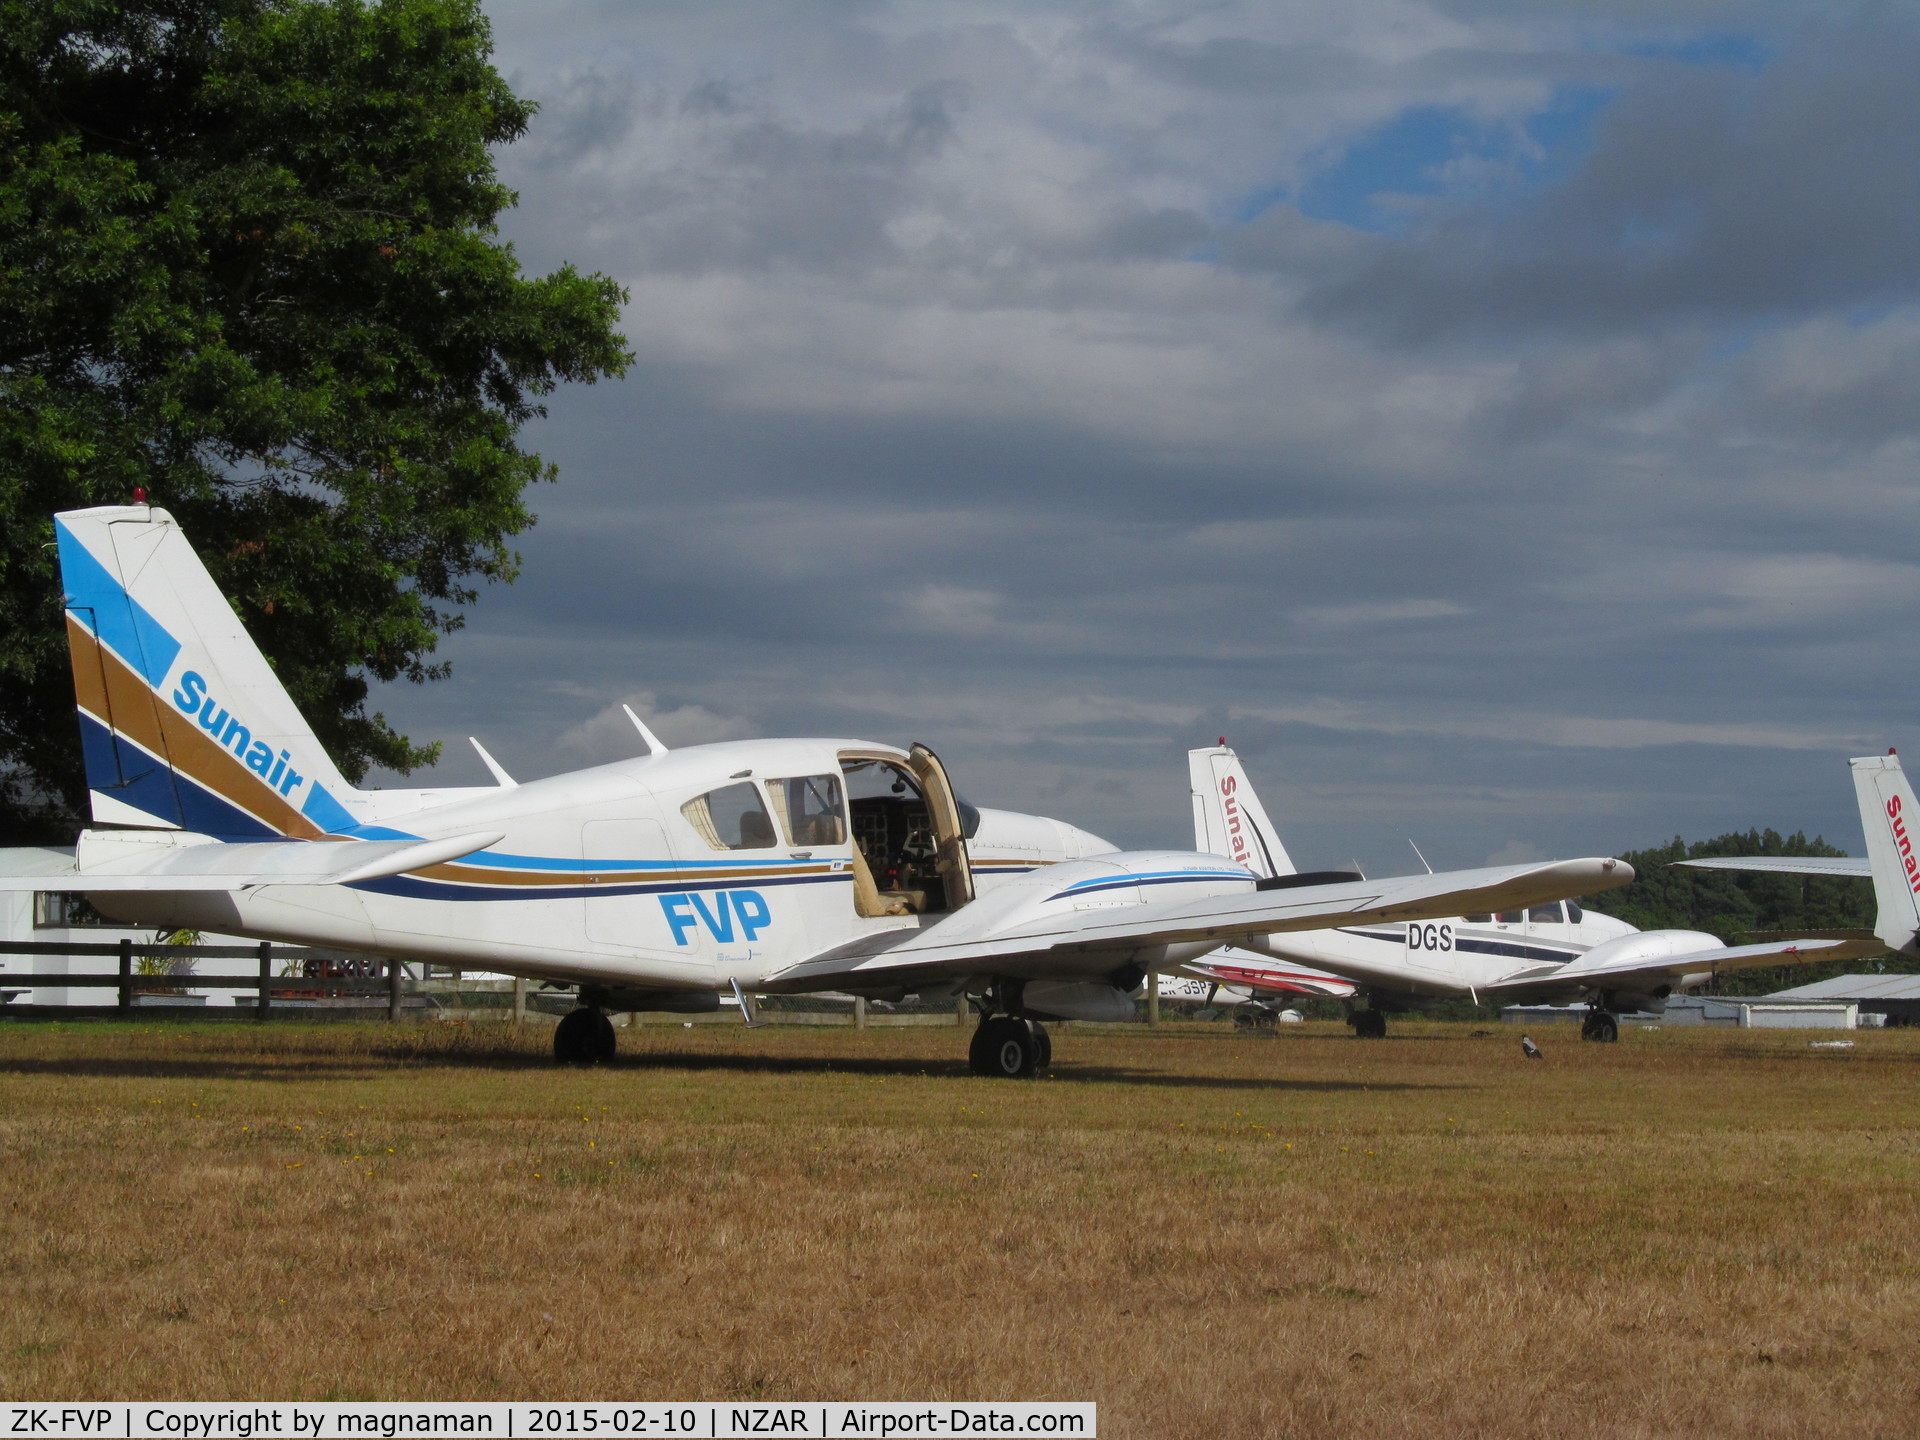 ZK-FVP, 1978 Piper PA-23-250 C/N 27-7854096, on of three sunair planes possibly now in temp storage at ardmore